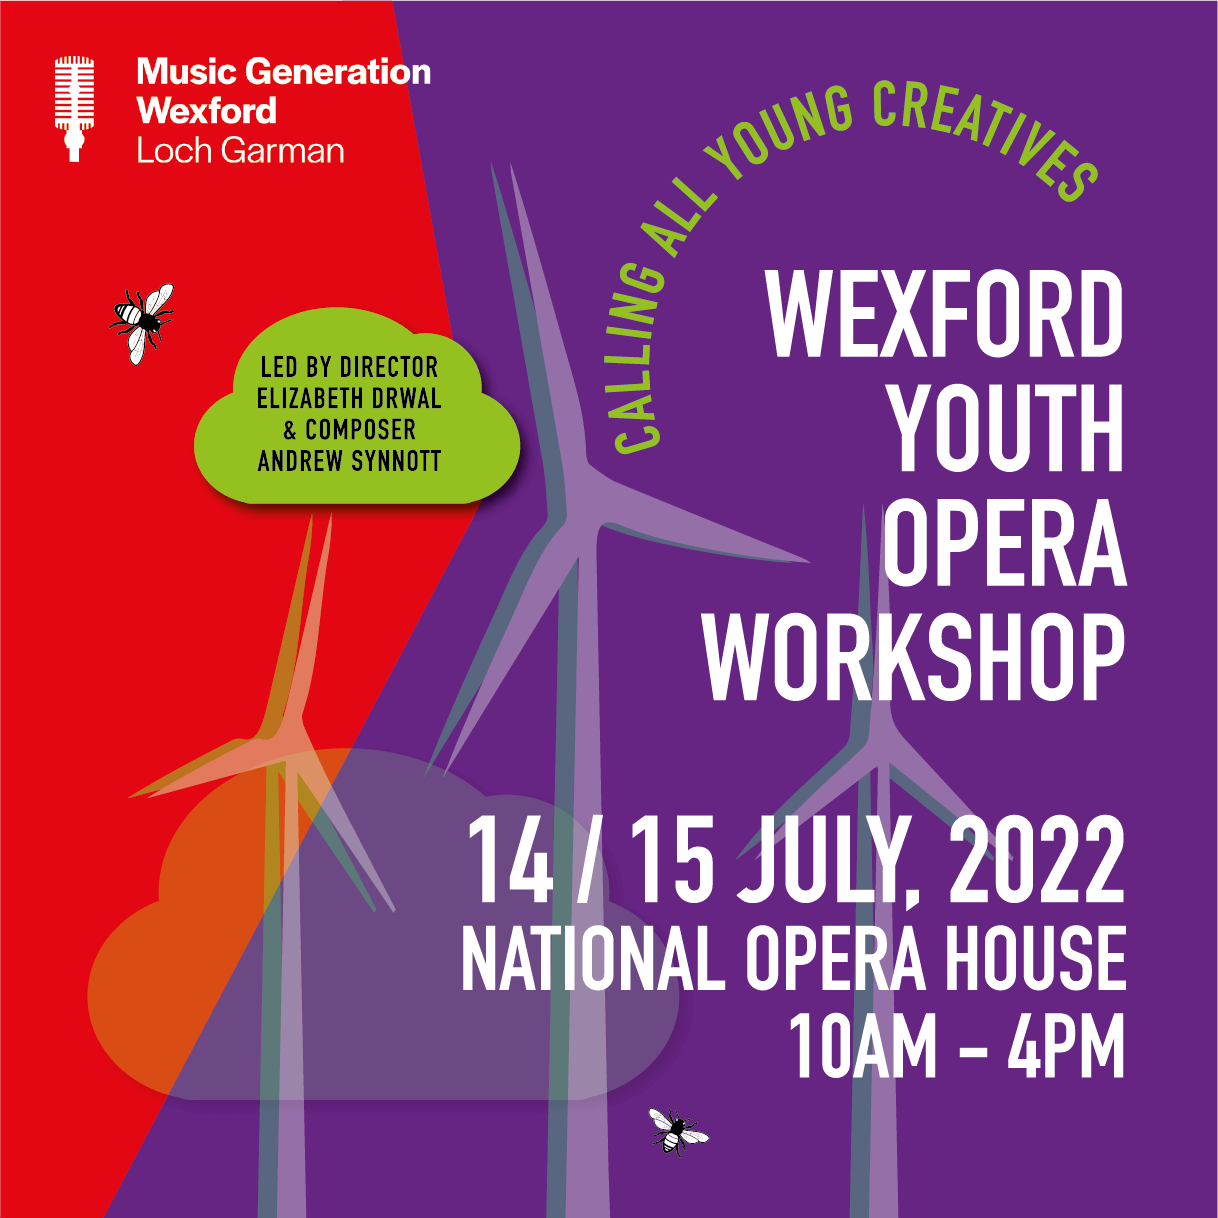 Join Music Generation Wexford’s Youth Opera Workshop